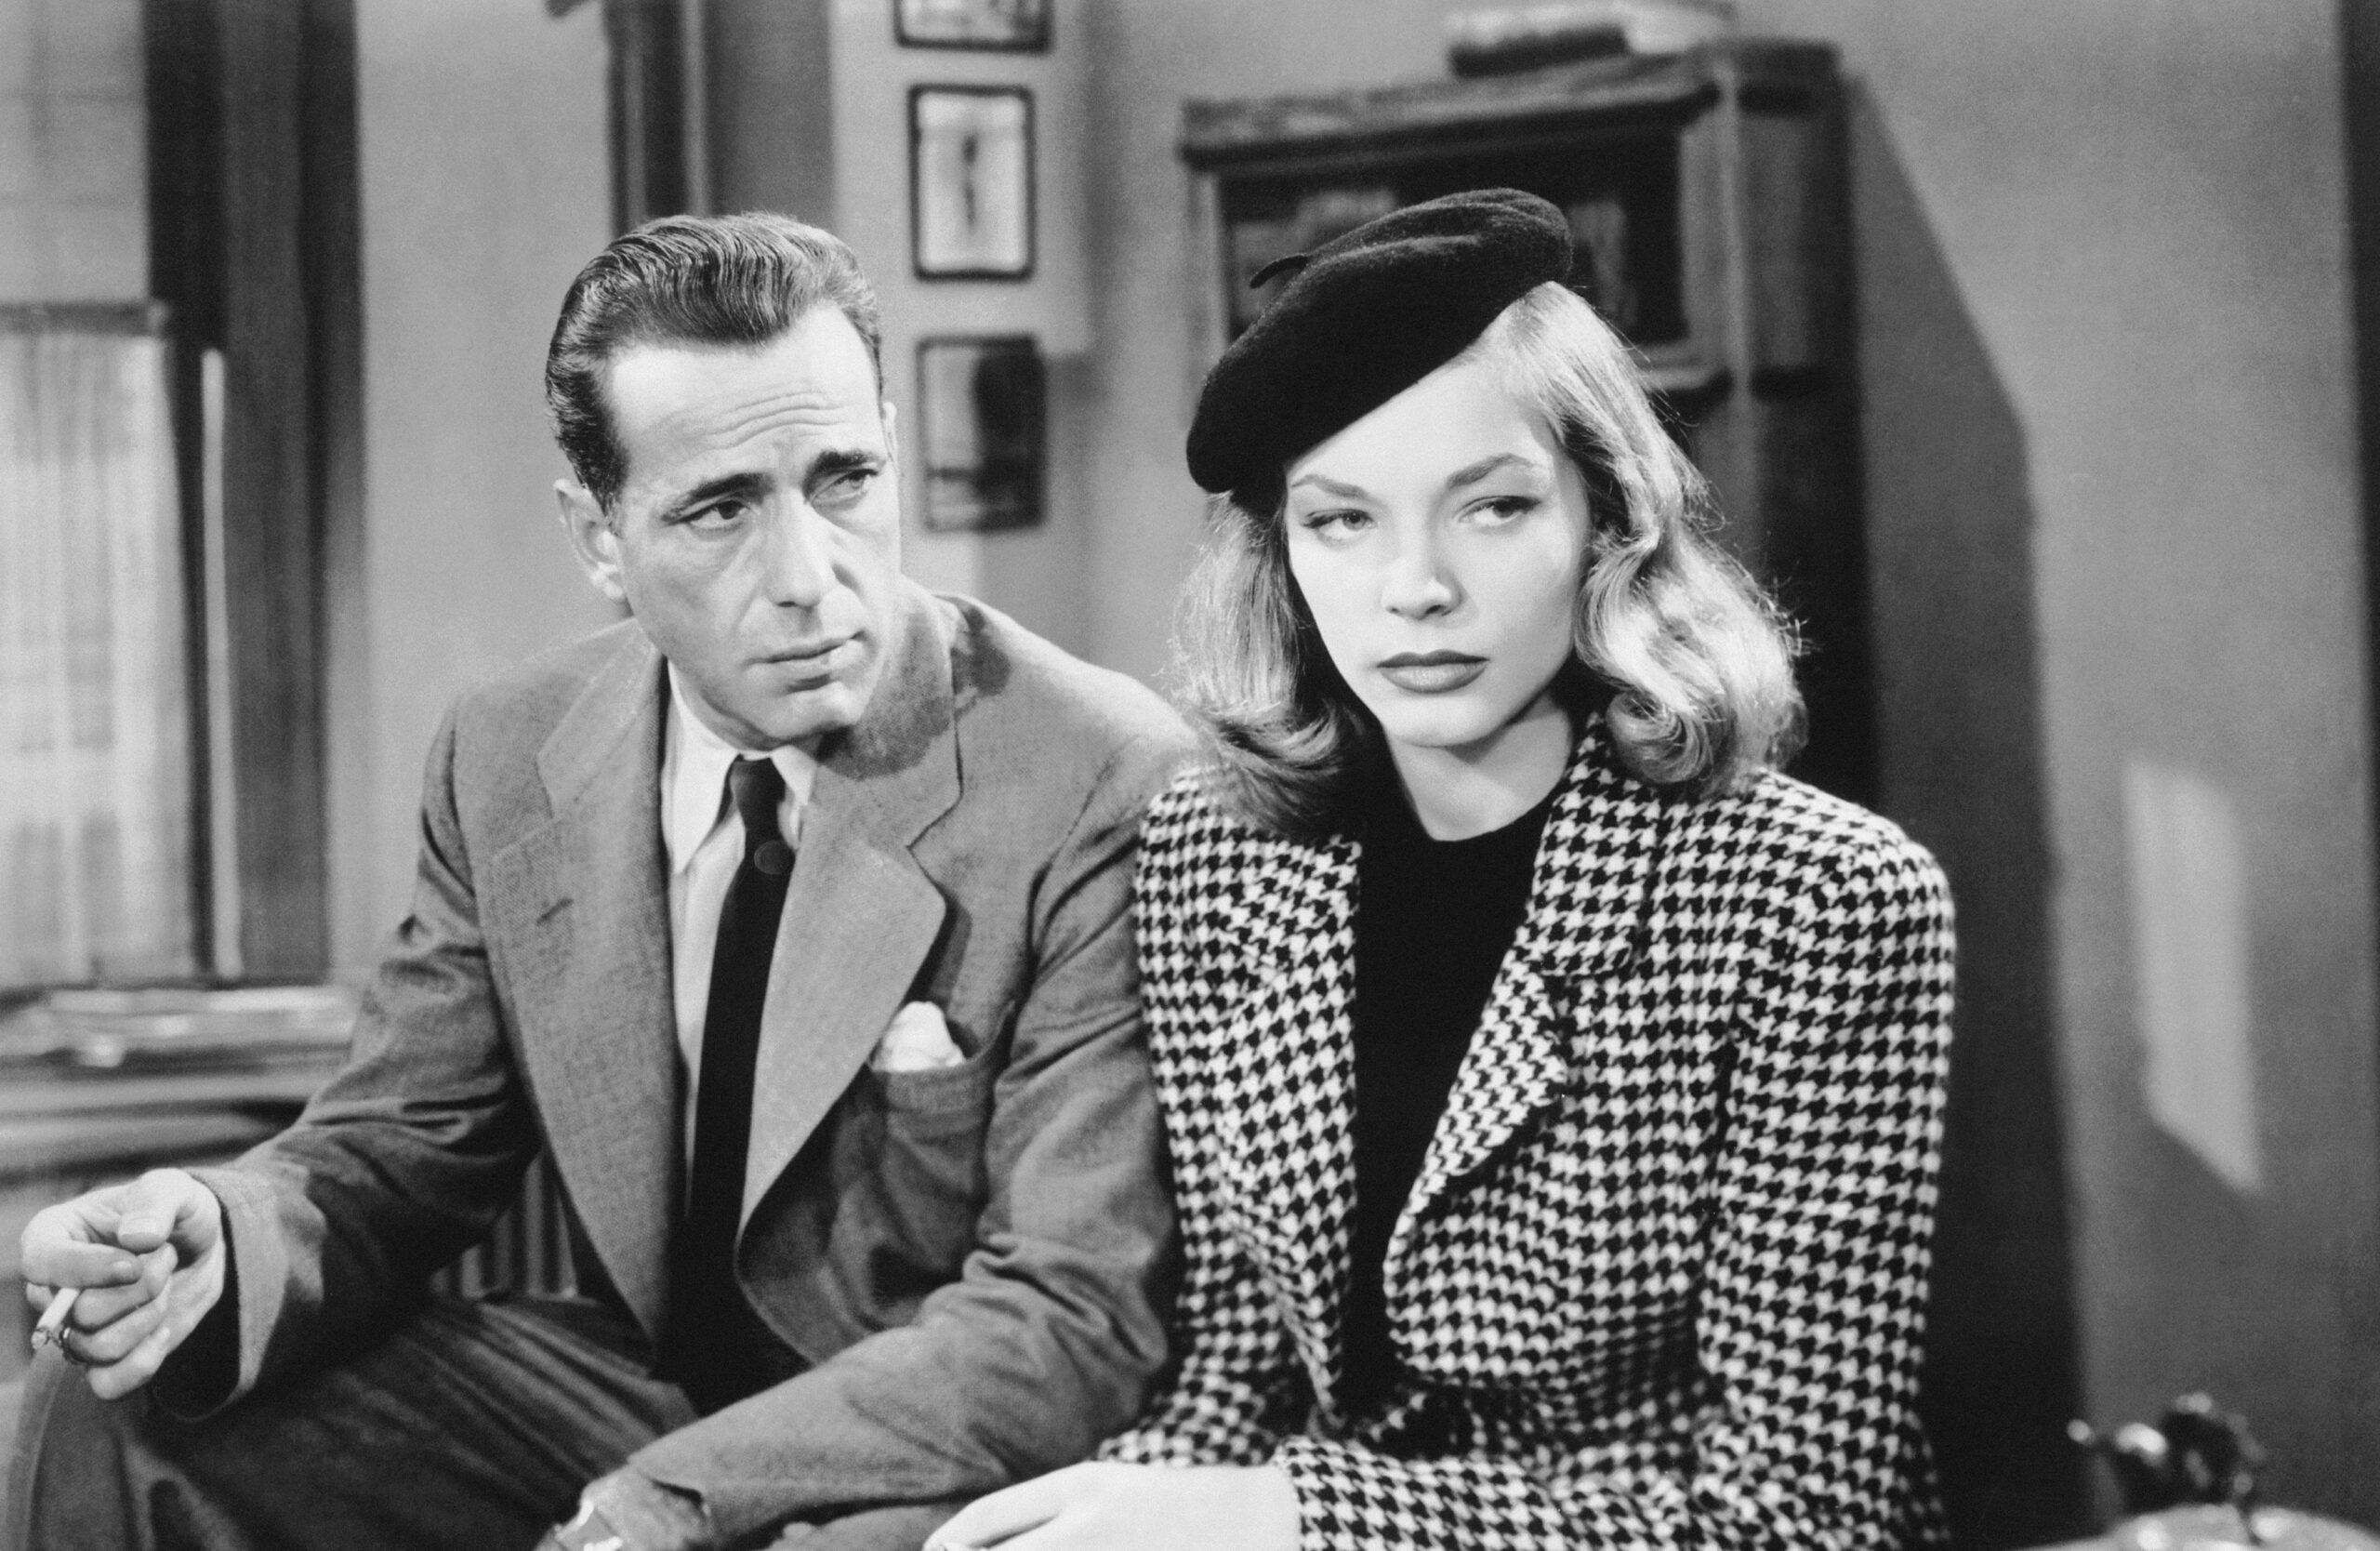 who plays the bookstore owner with whom philip marlowe humphrey bogart has a passing encounter in the big sleep 1946